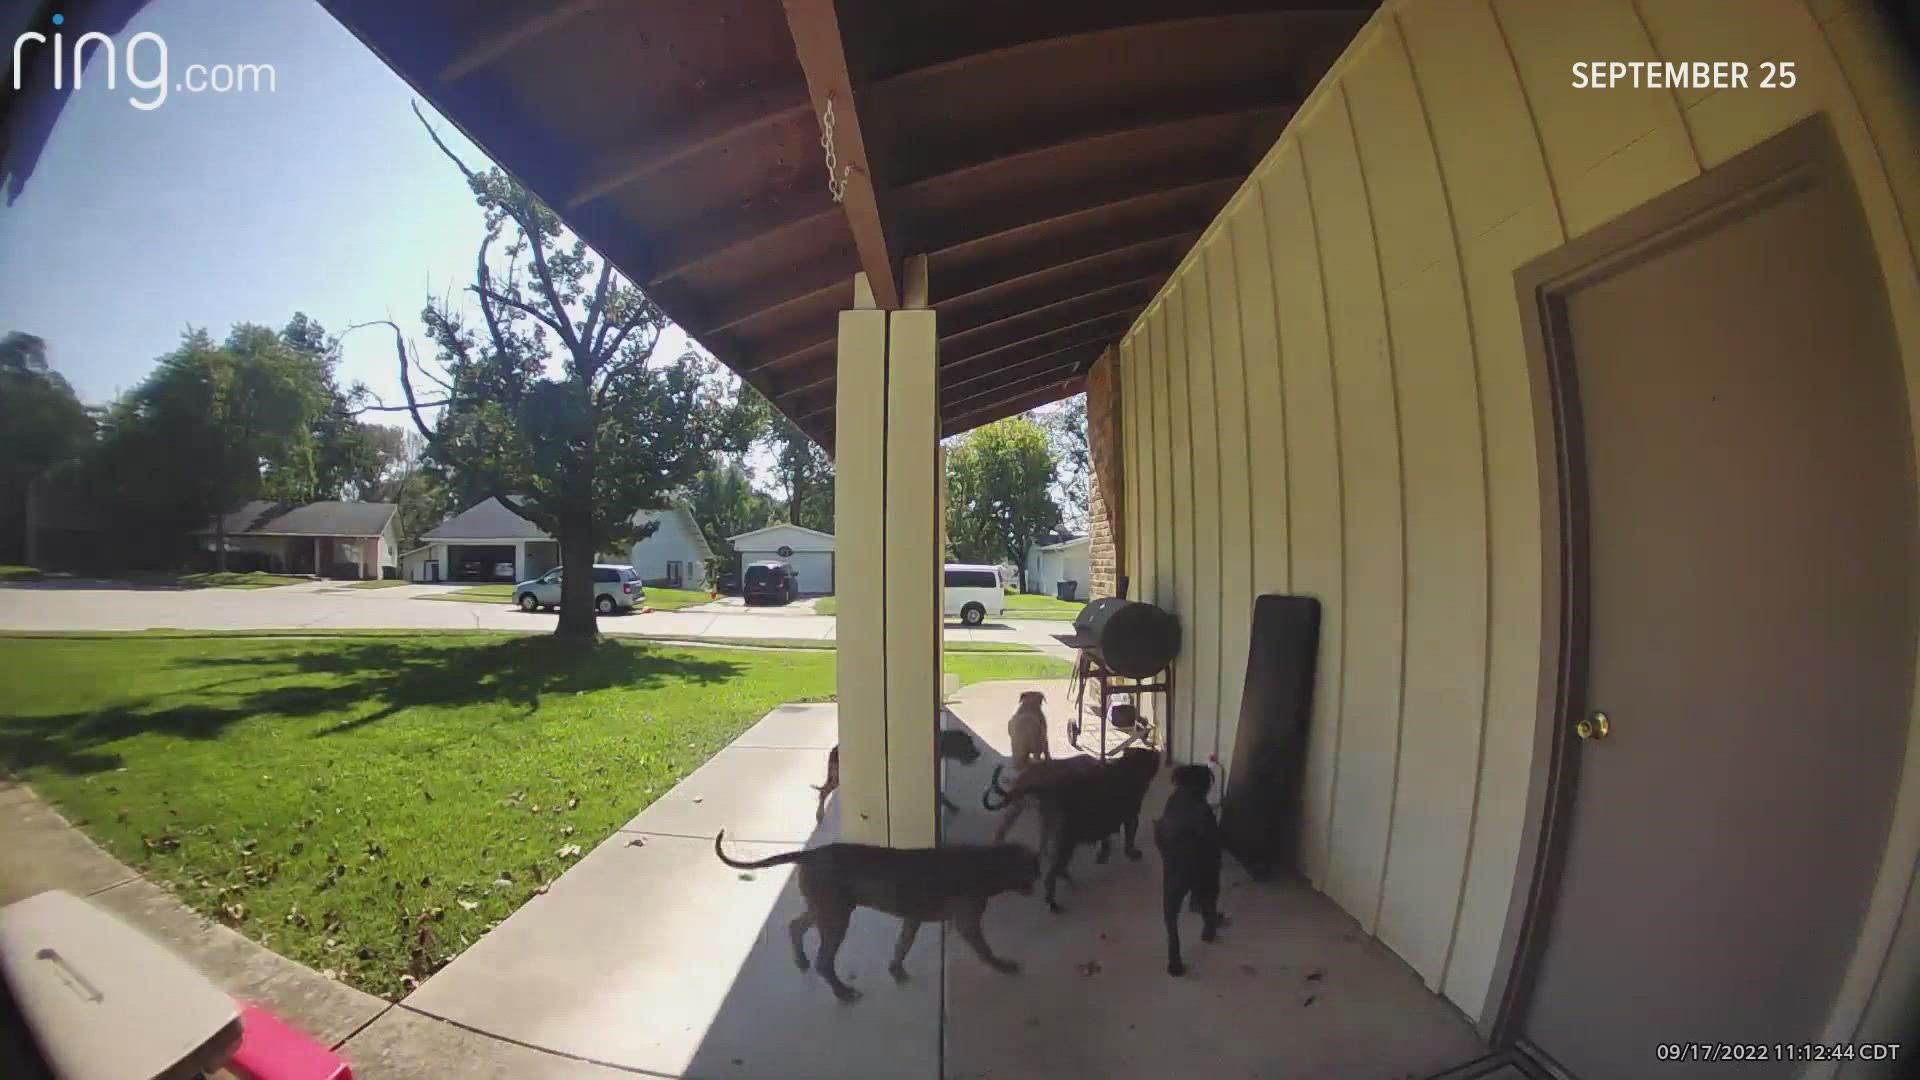 A 7-year-old girl was playing in her front yard in Florissant when she said a pack of wild dogs came charging at her and bit her.